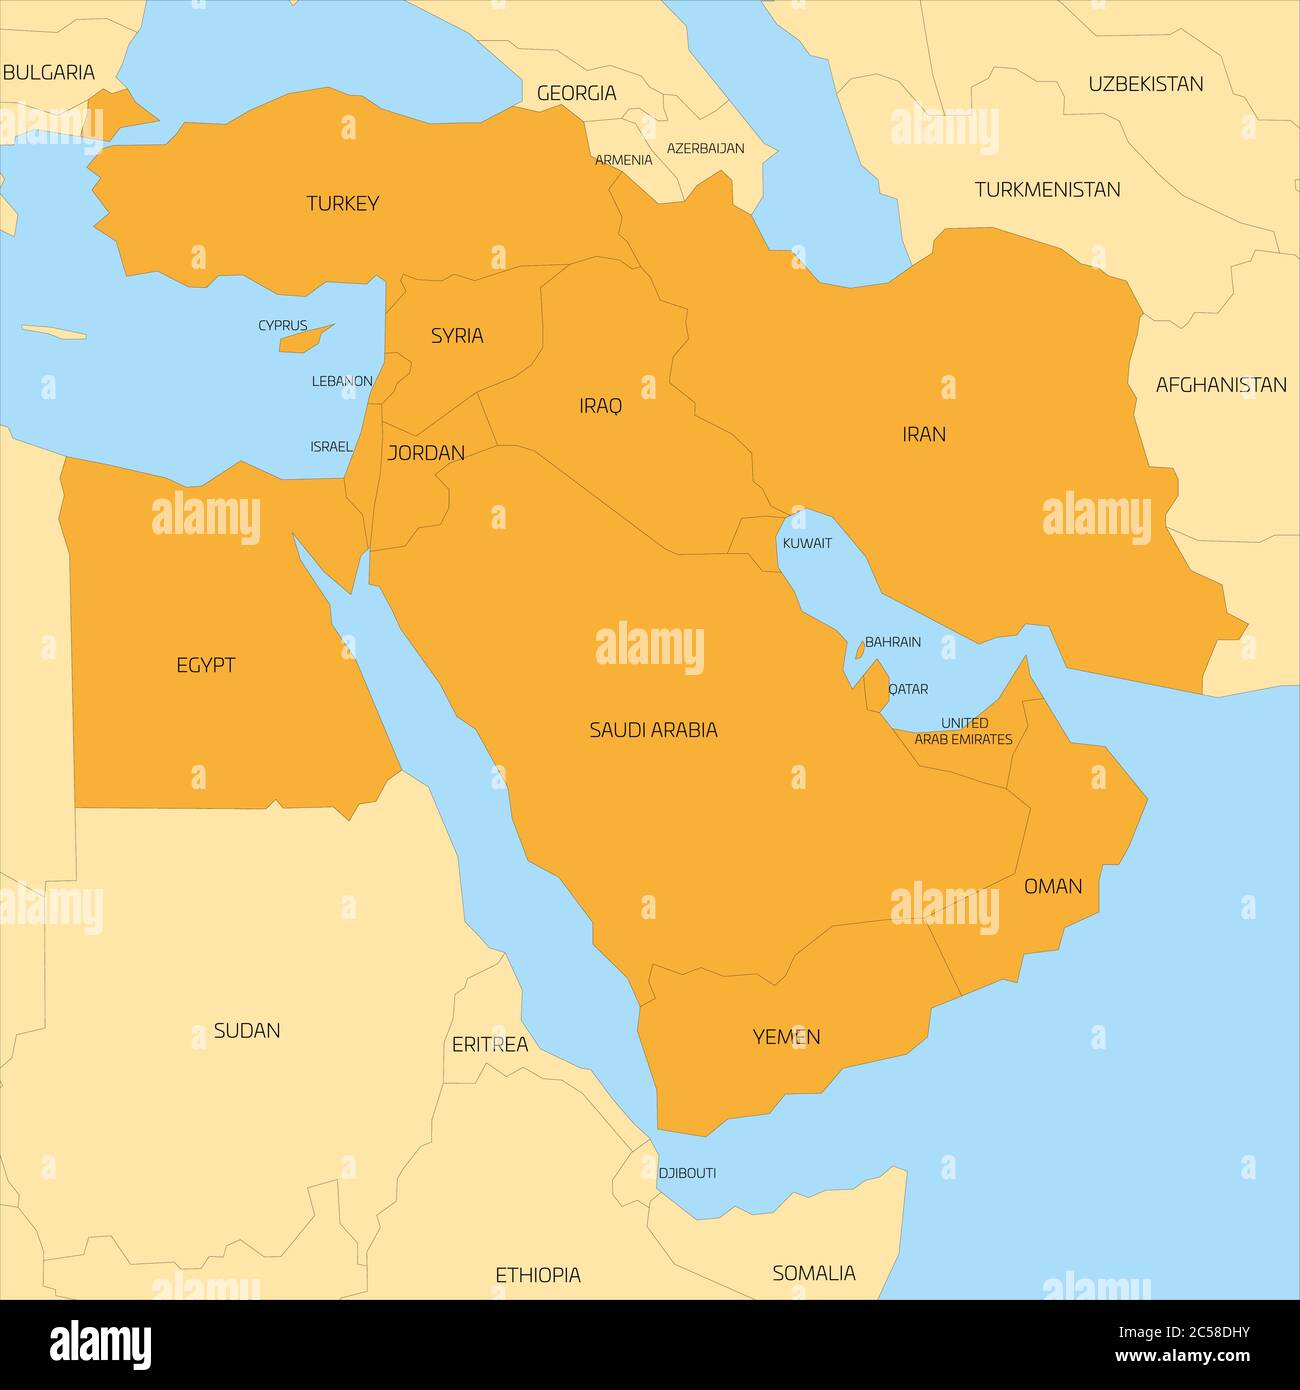 Map of Middle East or Near East transcontinental region with orange highlighted Western Asia countries, Turkey, Cyprus and Egypt. Flat map with yellow land, thin black borders and blue sea. Stock Vector